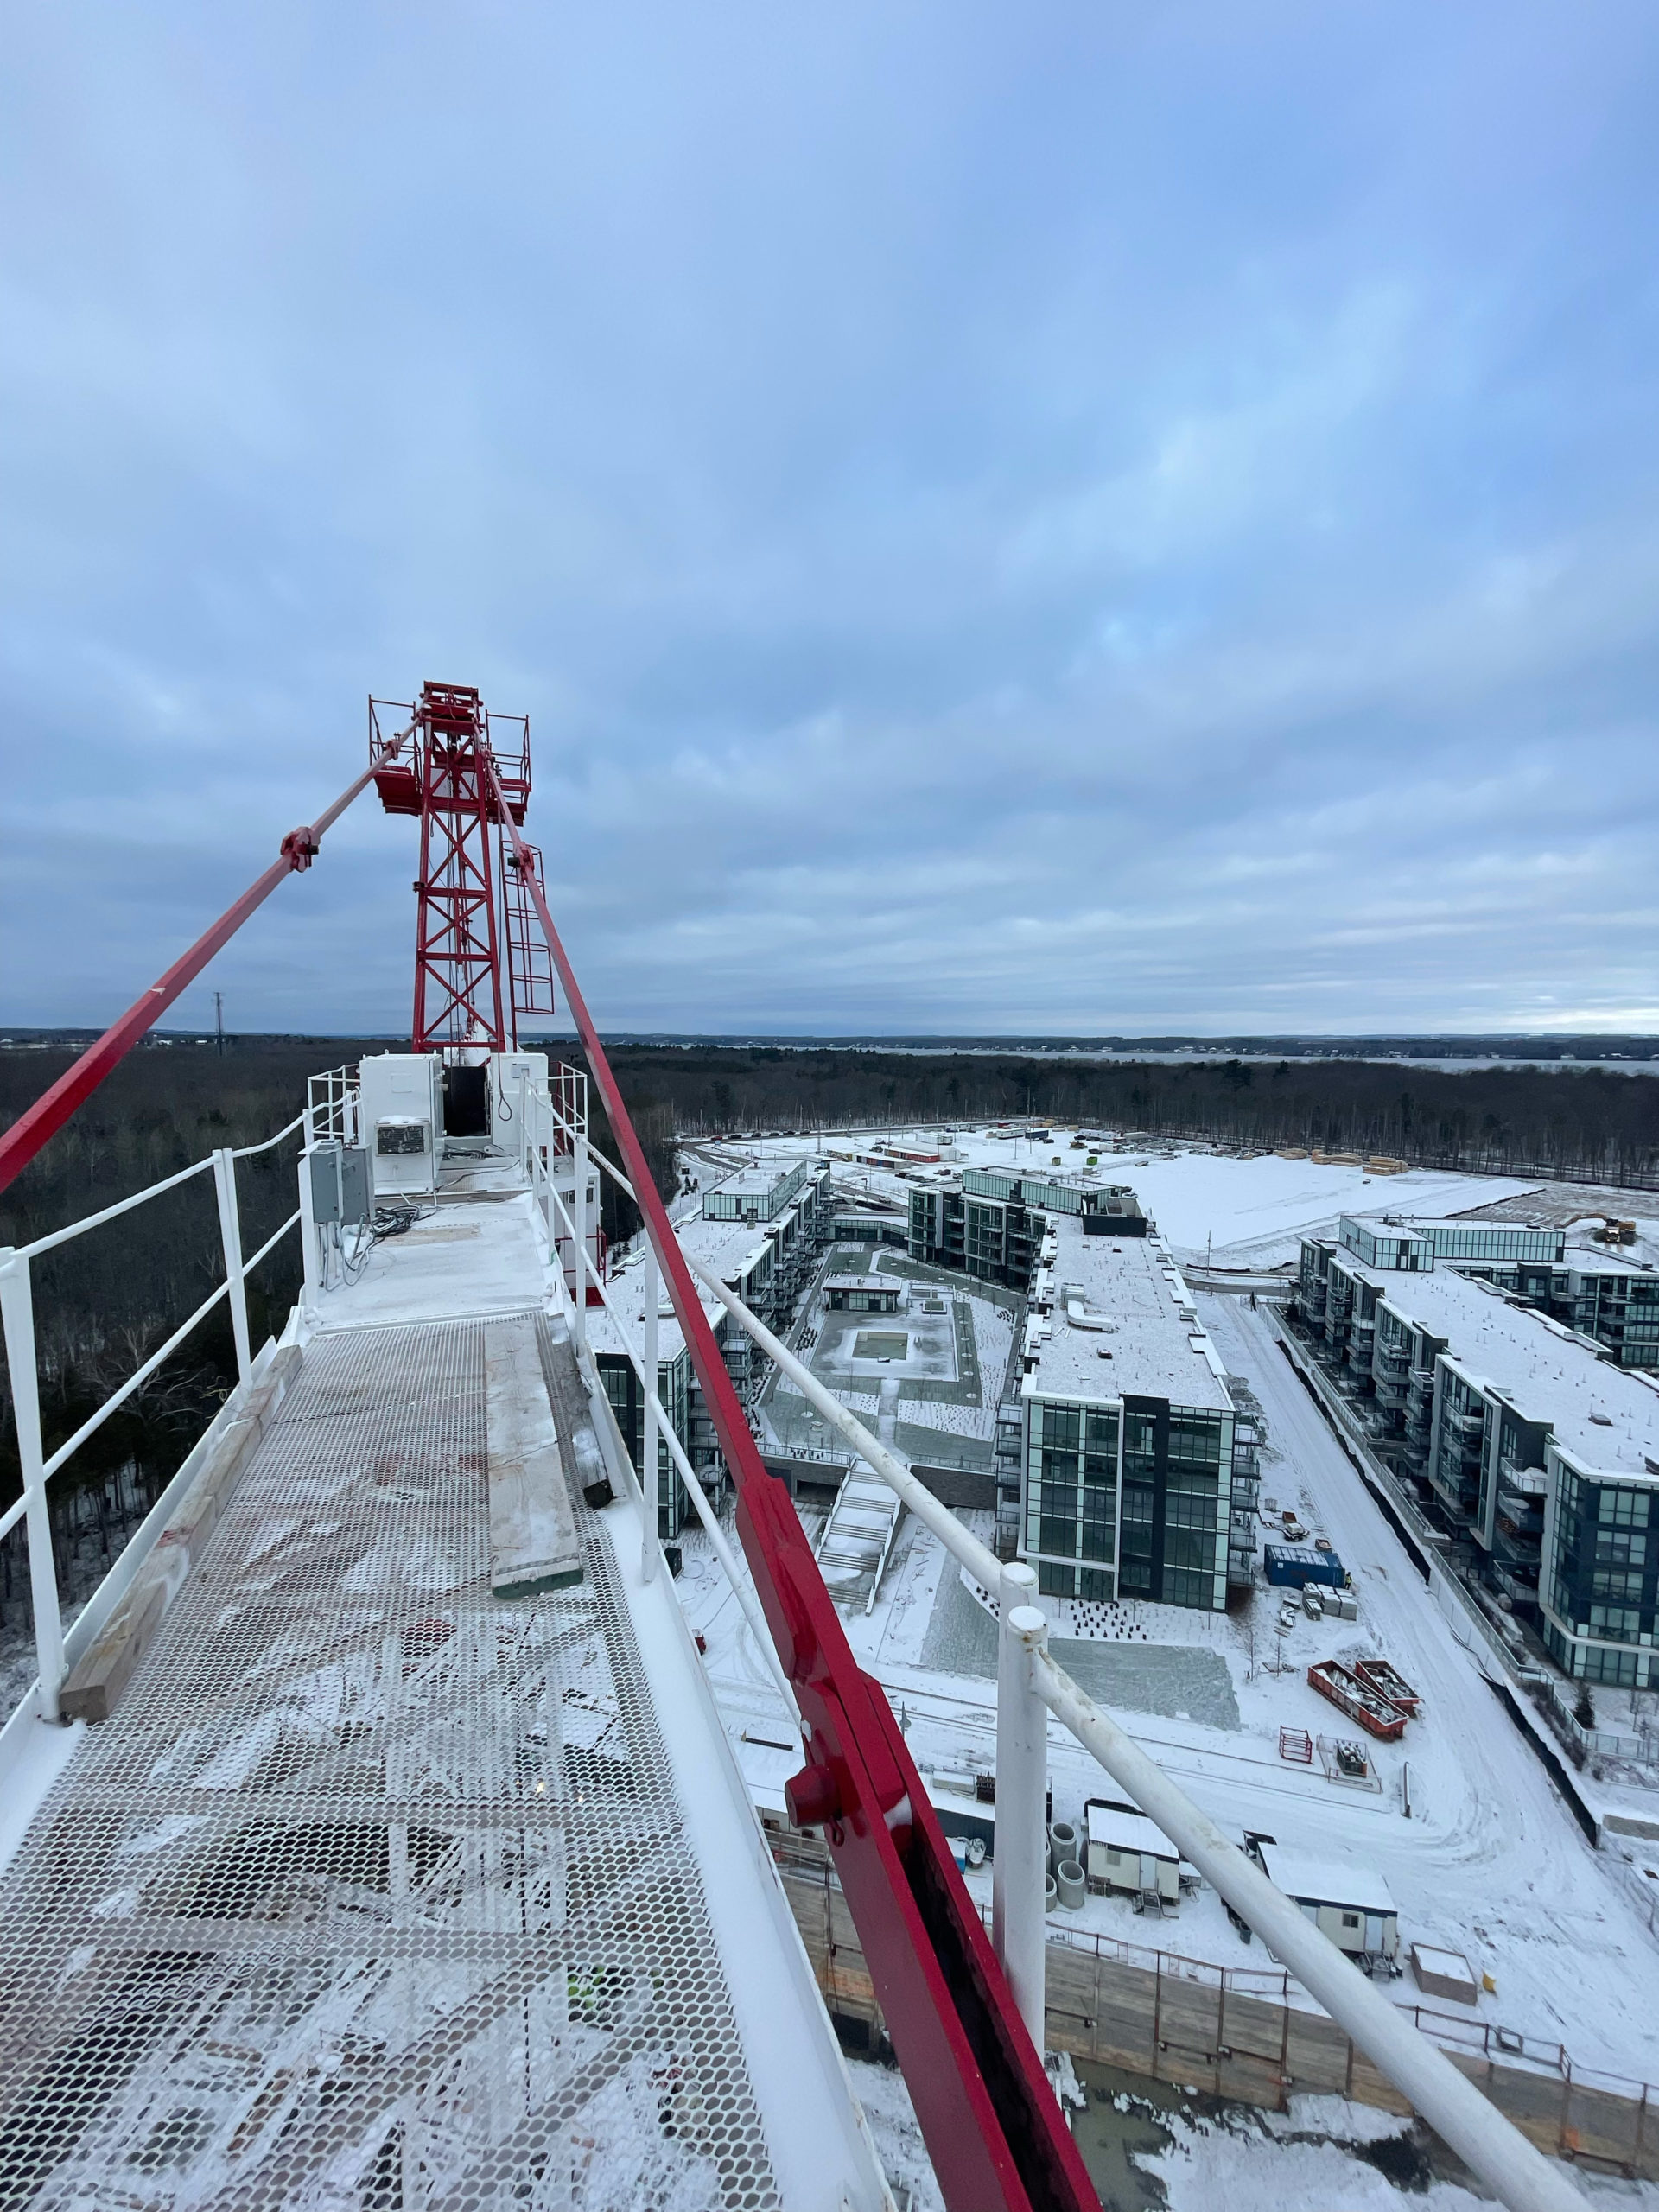 Townline photo from the crane